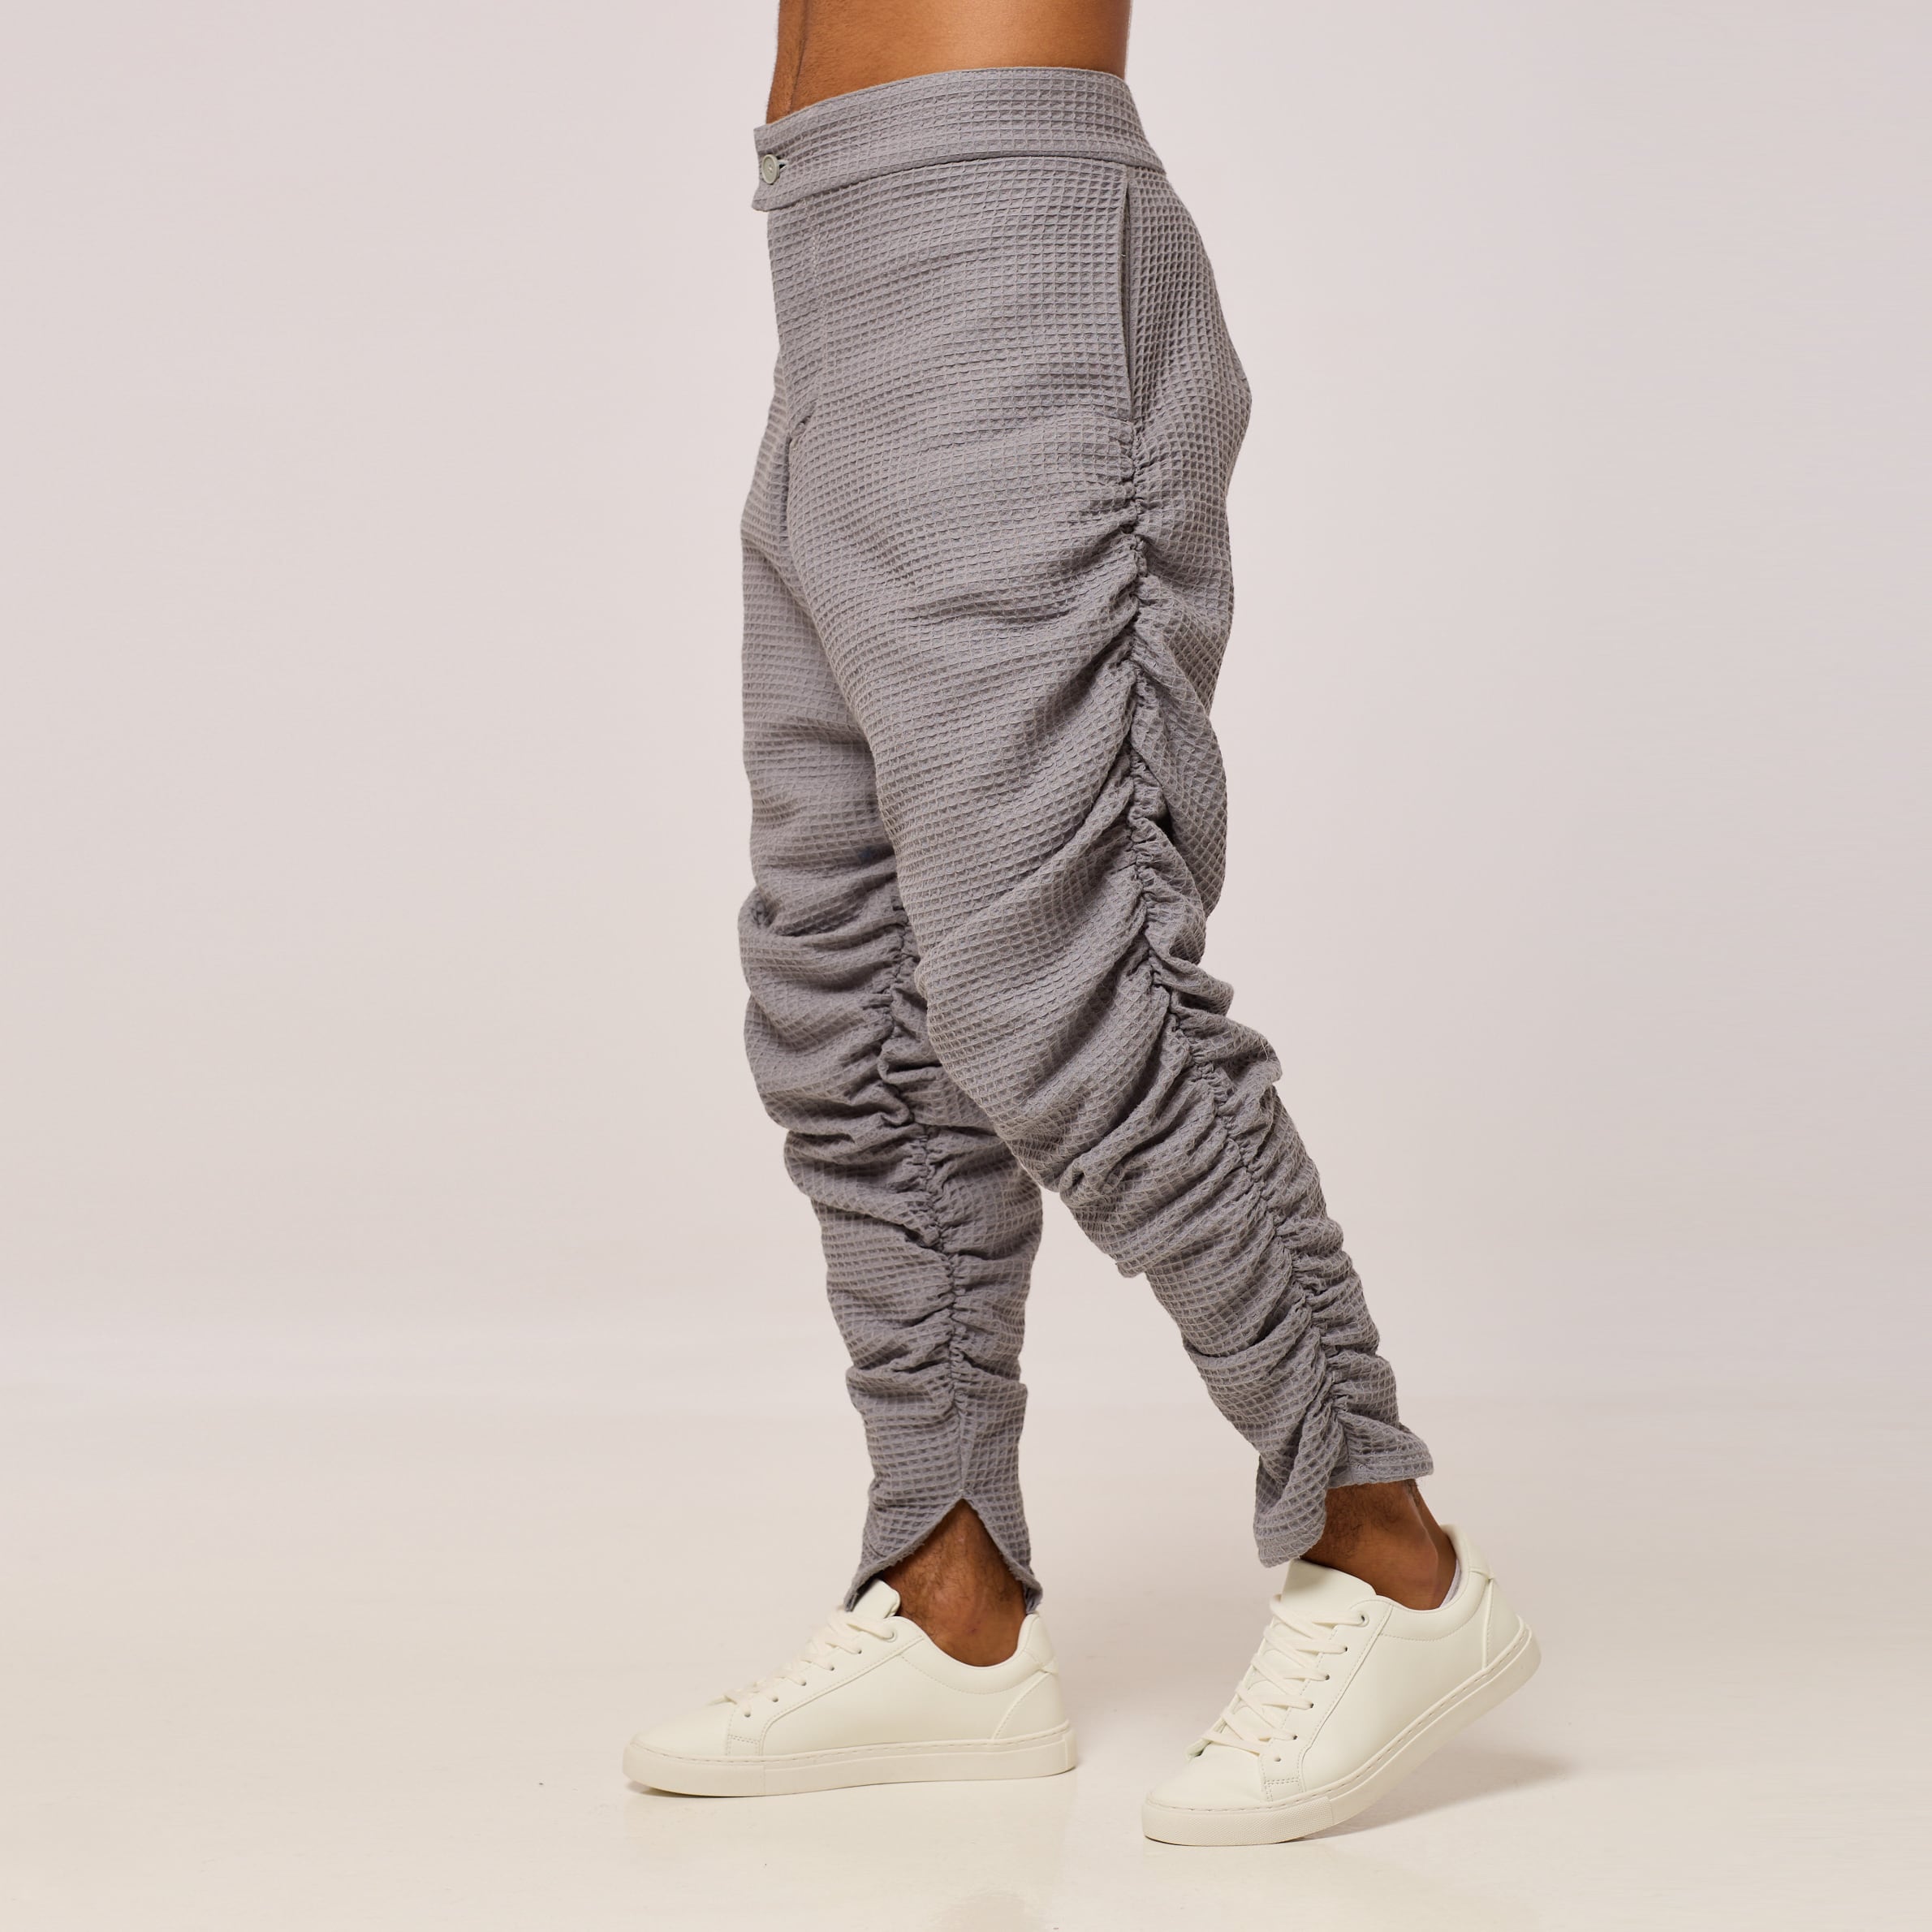 ZERØ London - Side close up view, mens zero waste grey trouser, designed & made in London